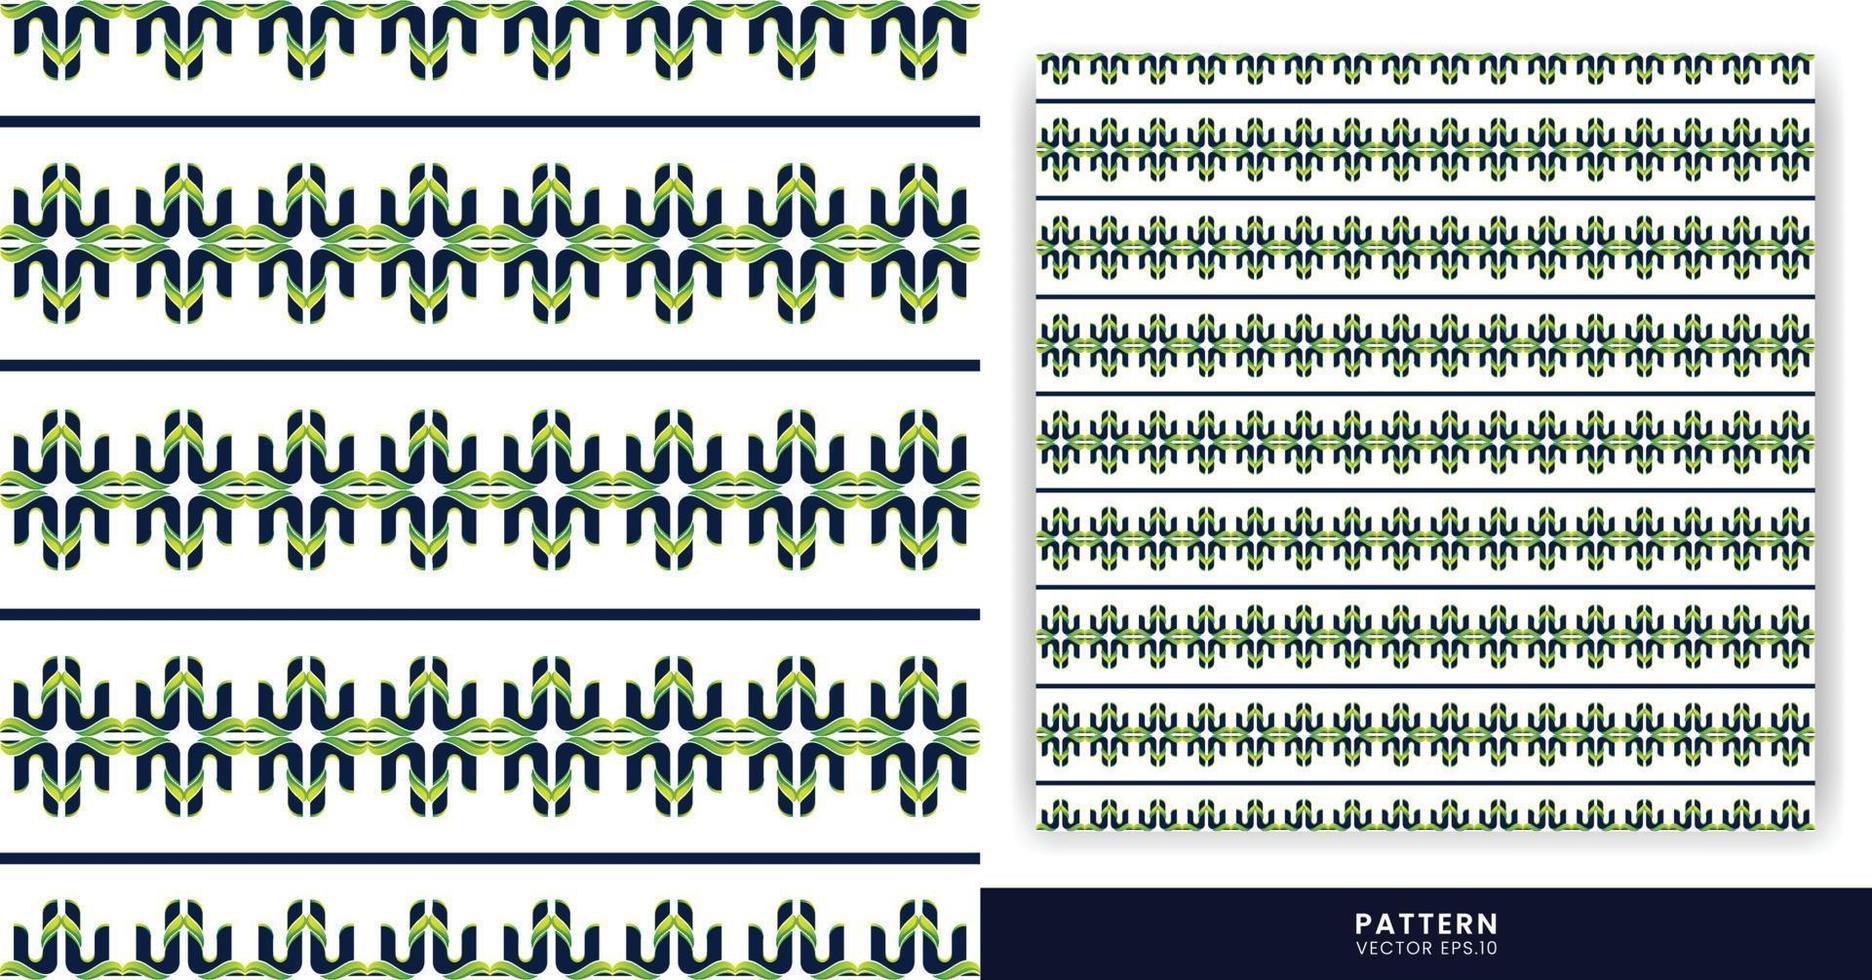 Patterns With Ornamental Themes - A Combination Of Blue And Green Colors With A Modern And Luxurious Tone On A White Background Can Be Used To Design Clothing, Books, Gifts, Or Other Designs. vector